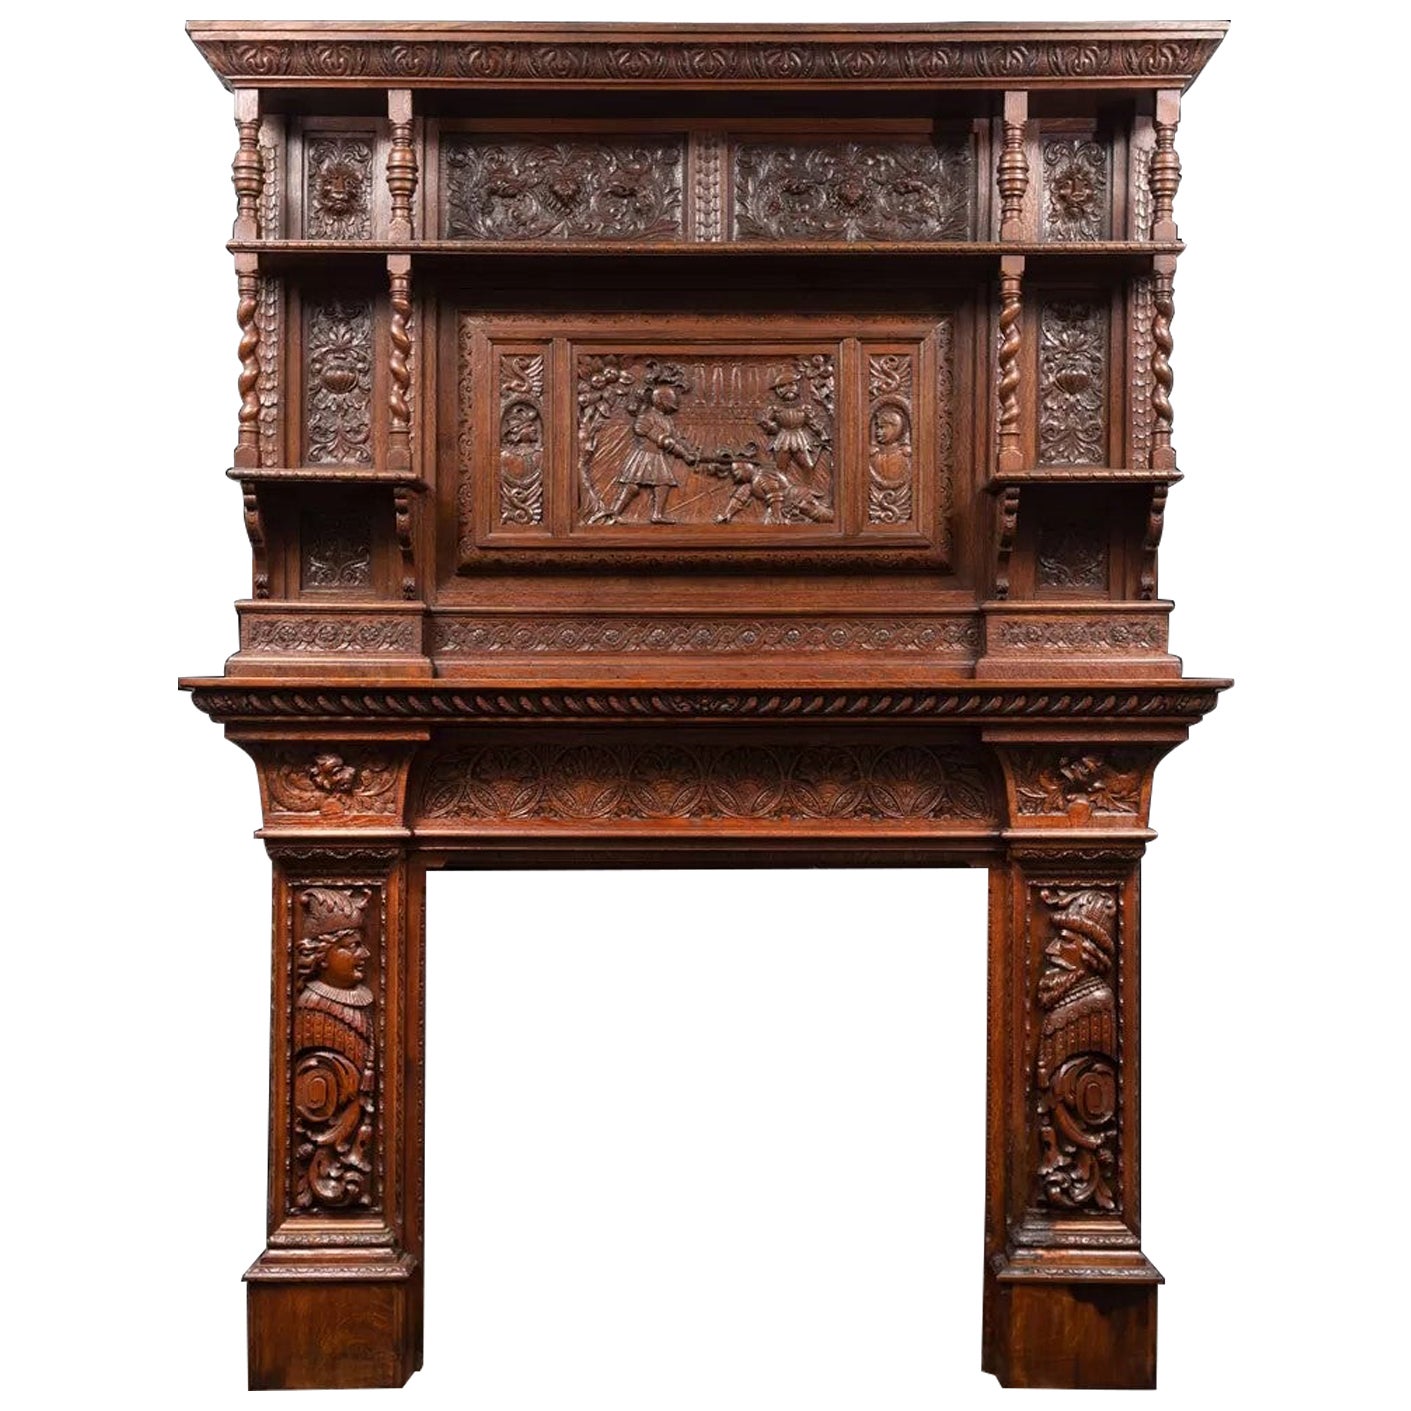 An antique oak fireplace surround, made in the Jacobean style.